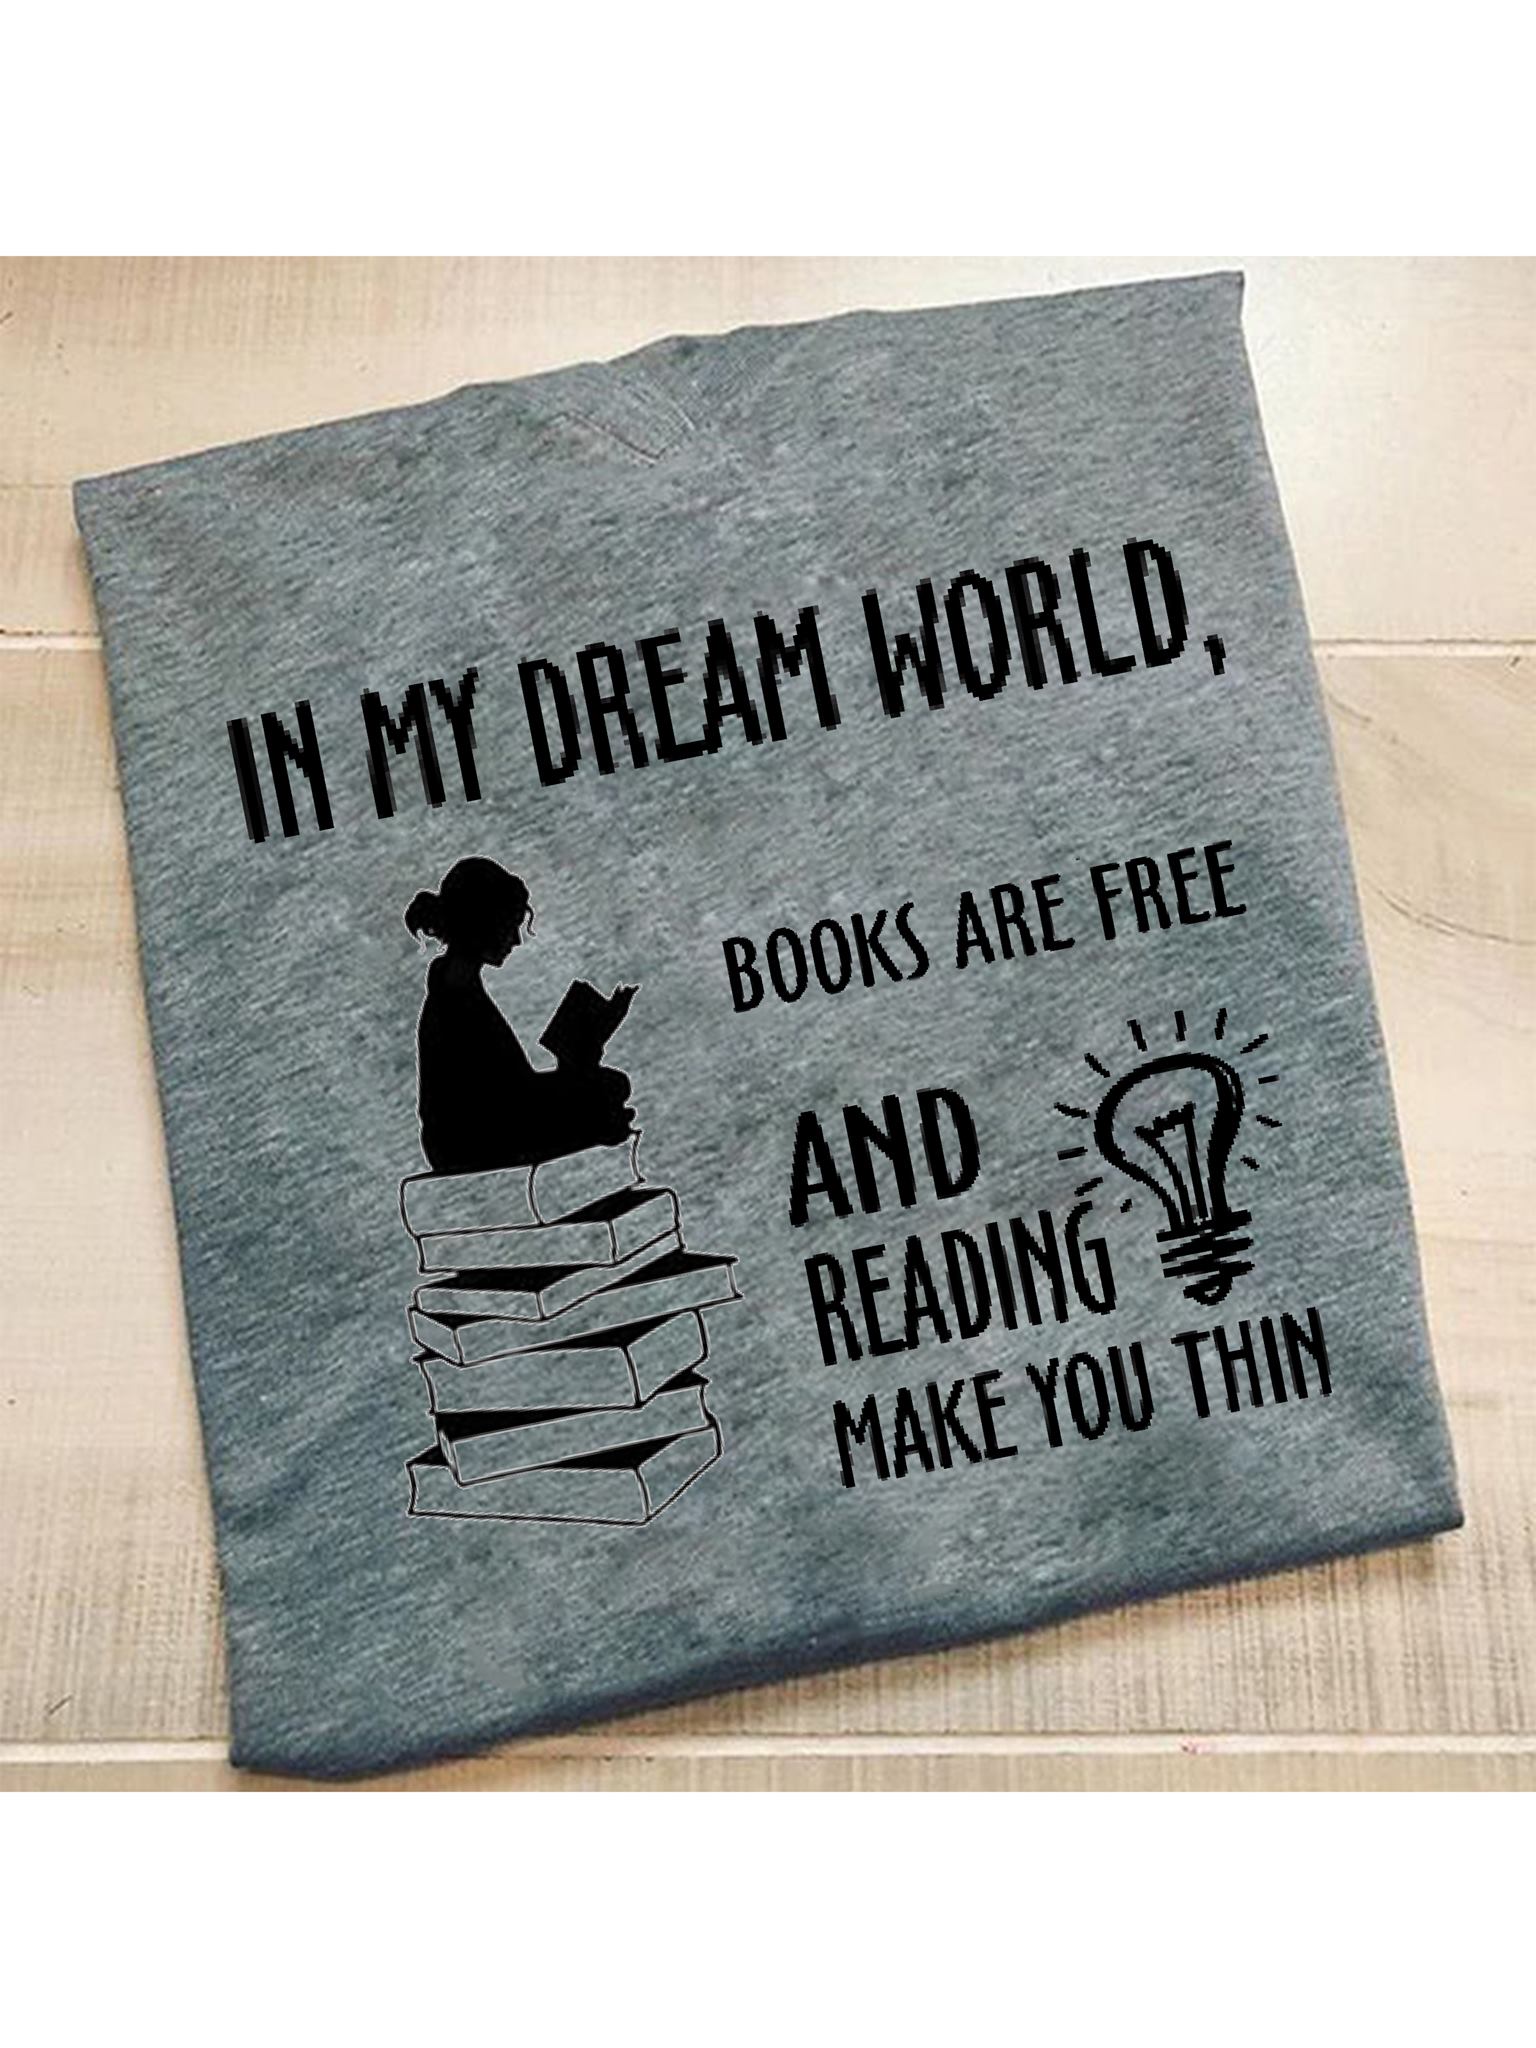 In my dream world, books are free and reading make you thin